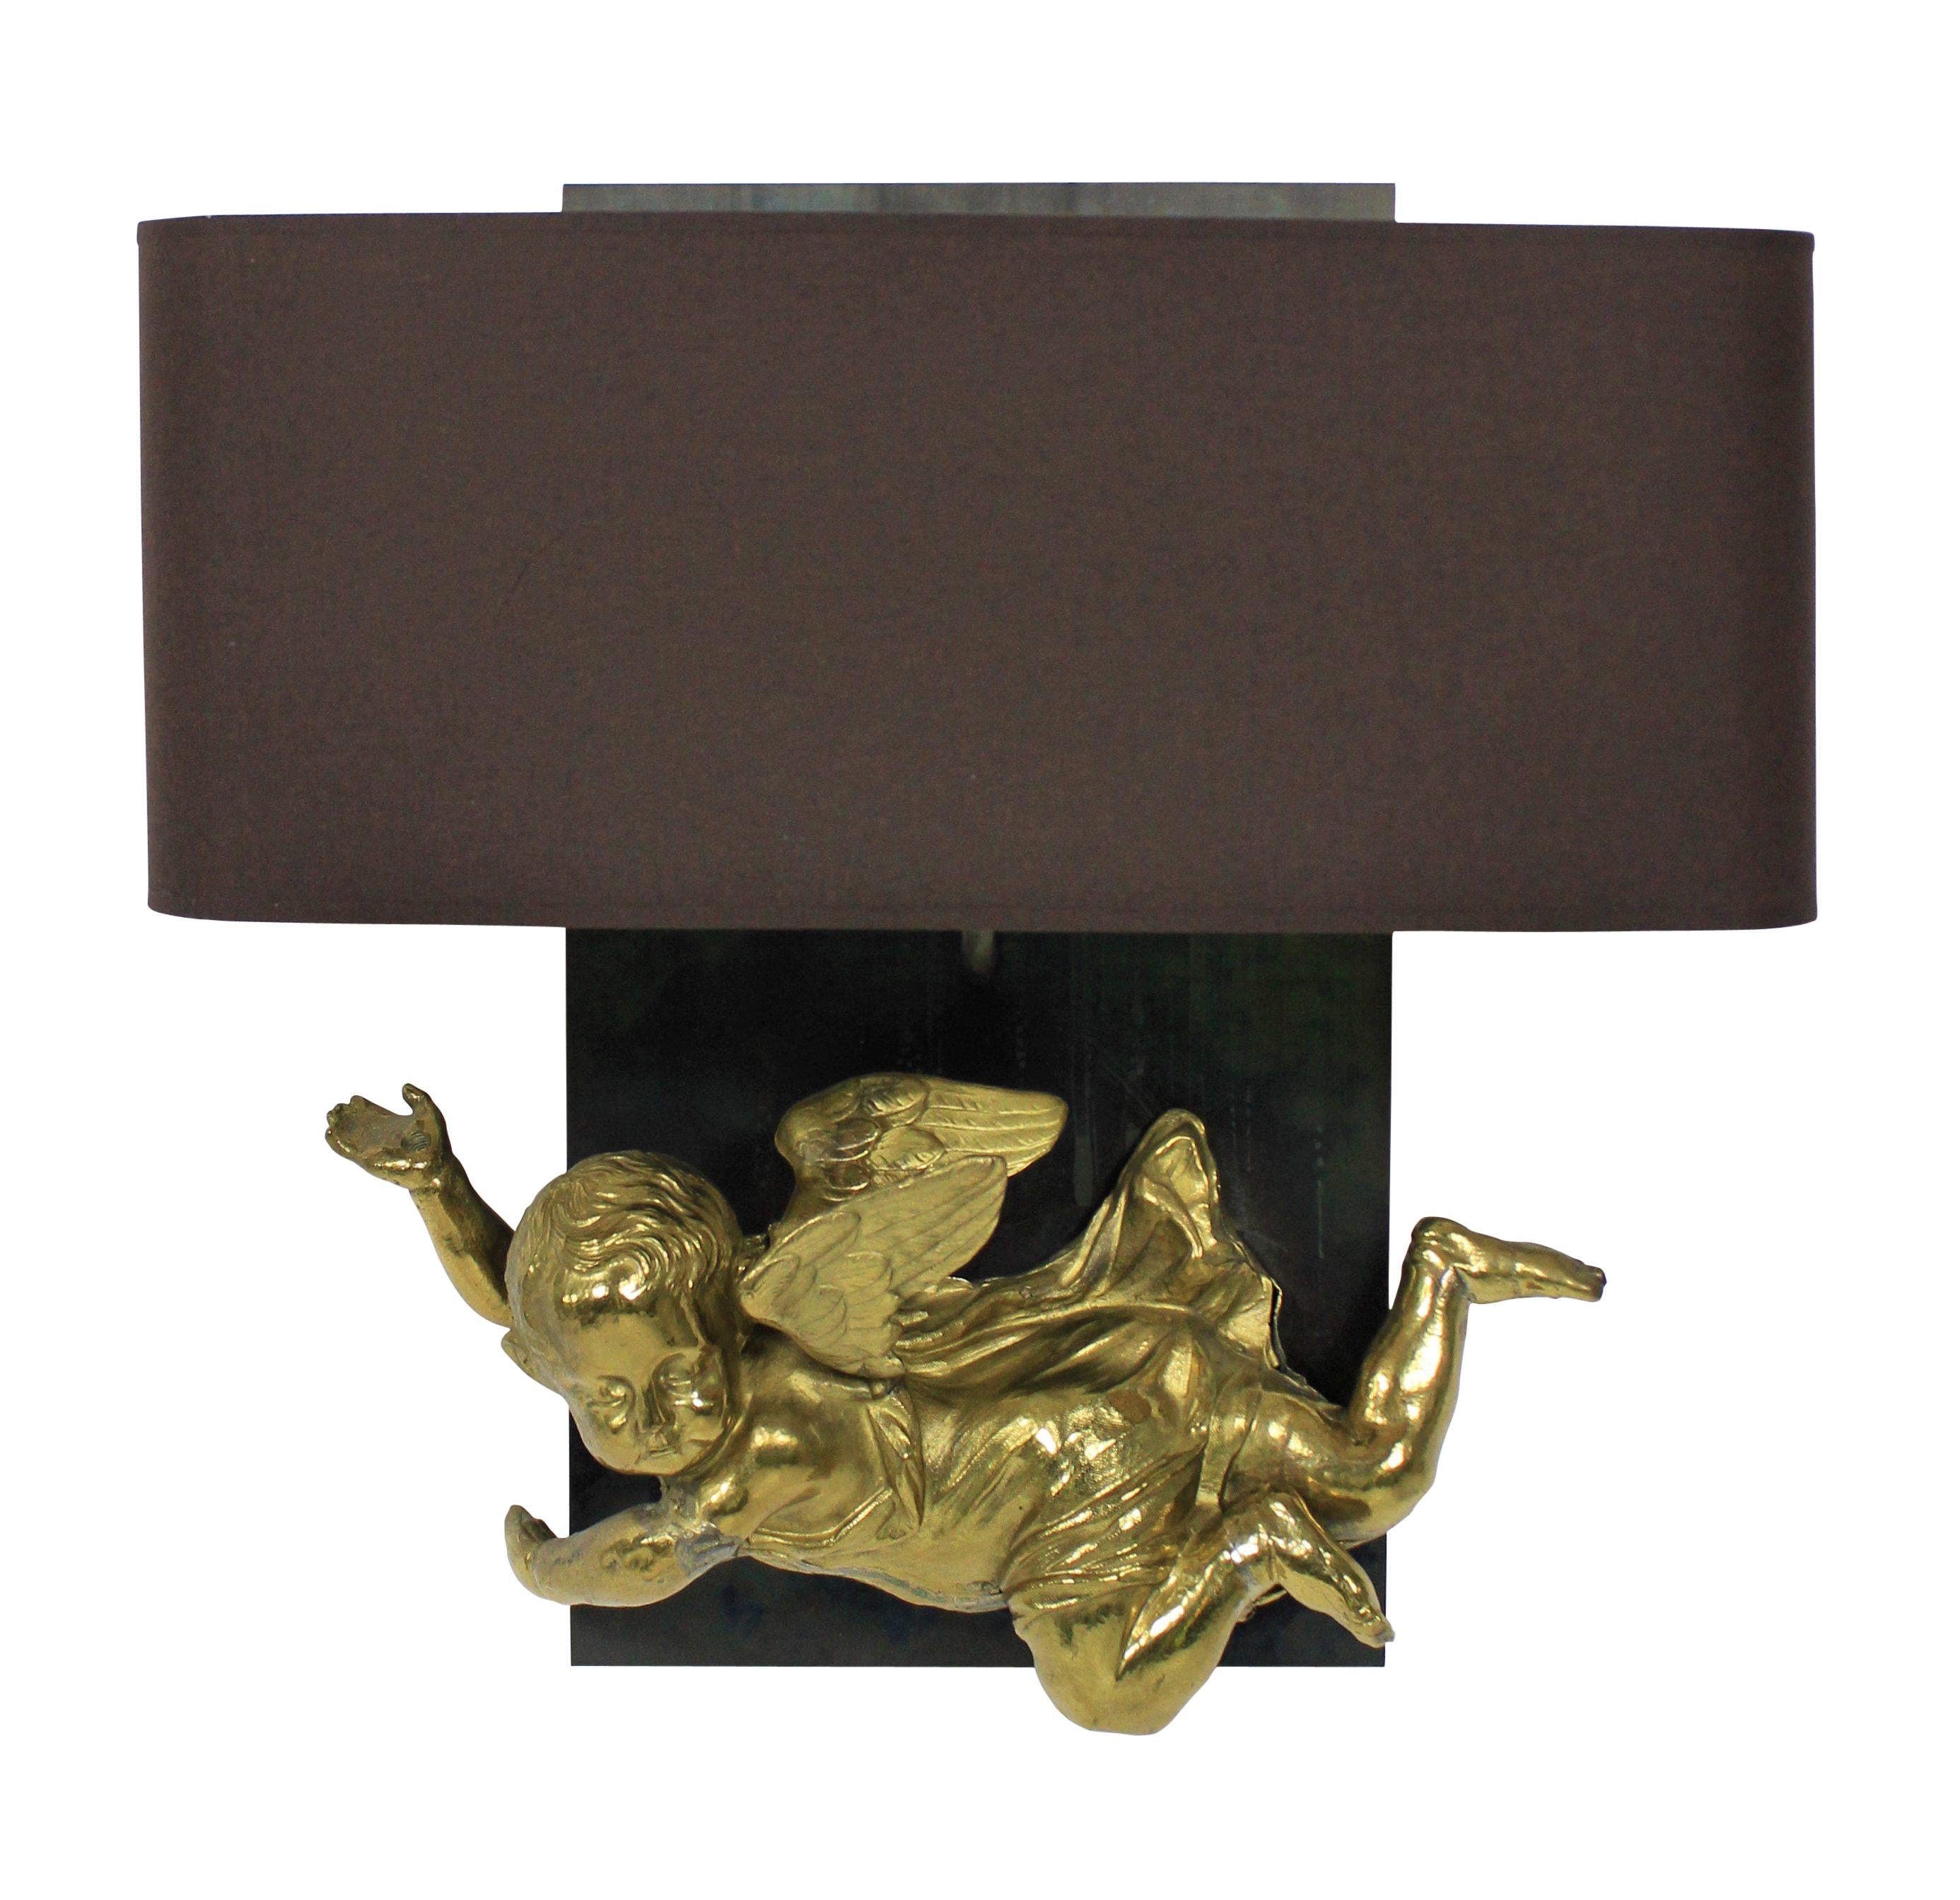 A pair of unusual French wall sconces incorporating two early 19th century gilt metal cherubs on polished steel back plates with half shades.